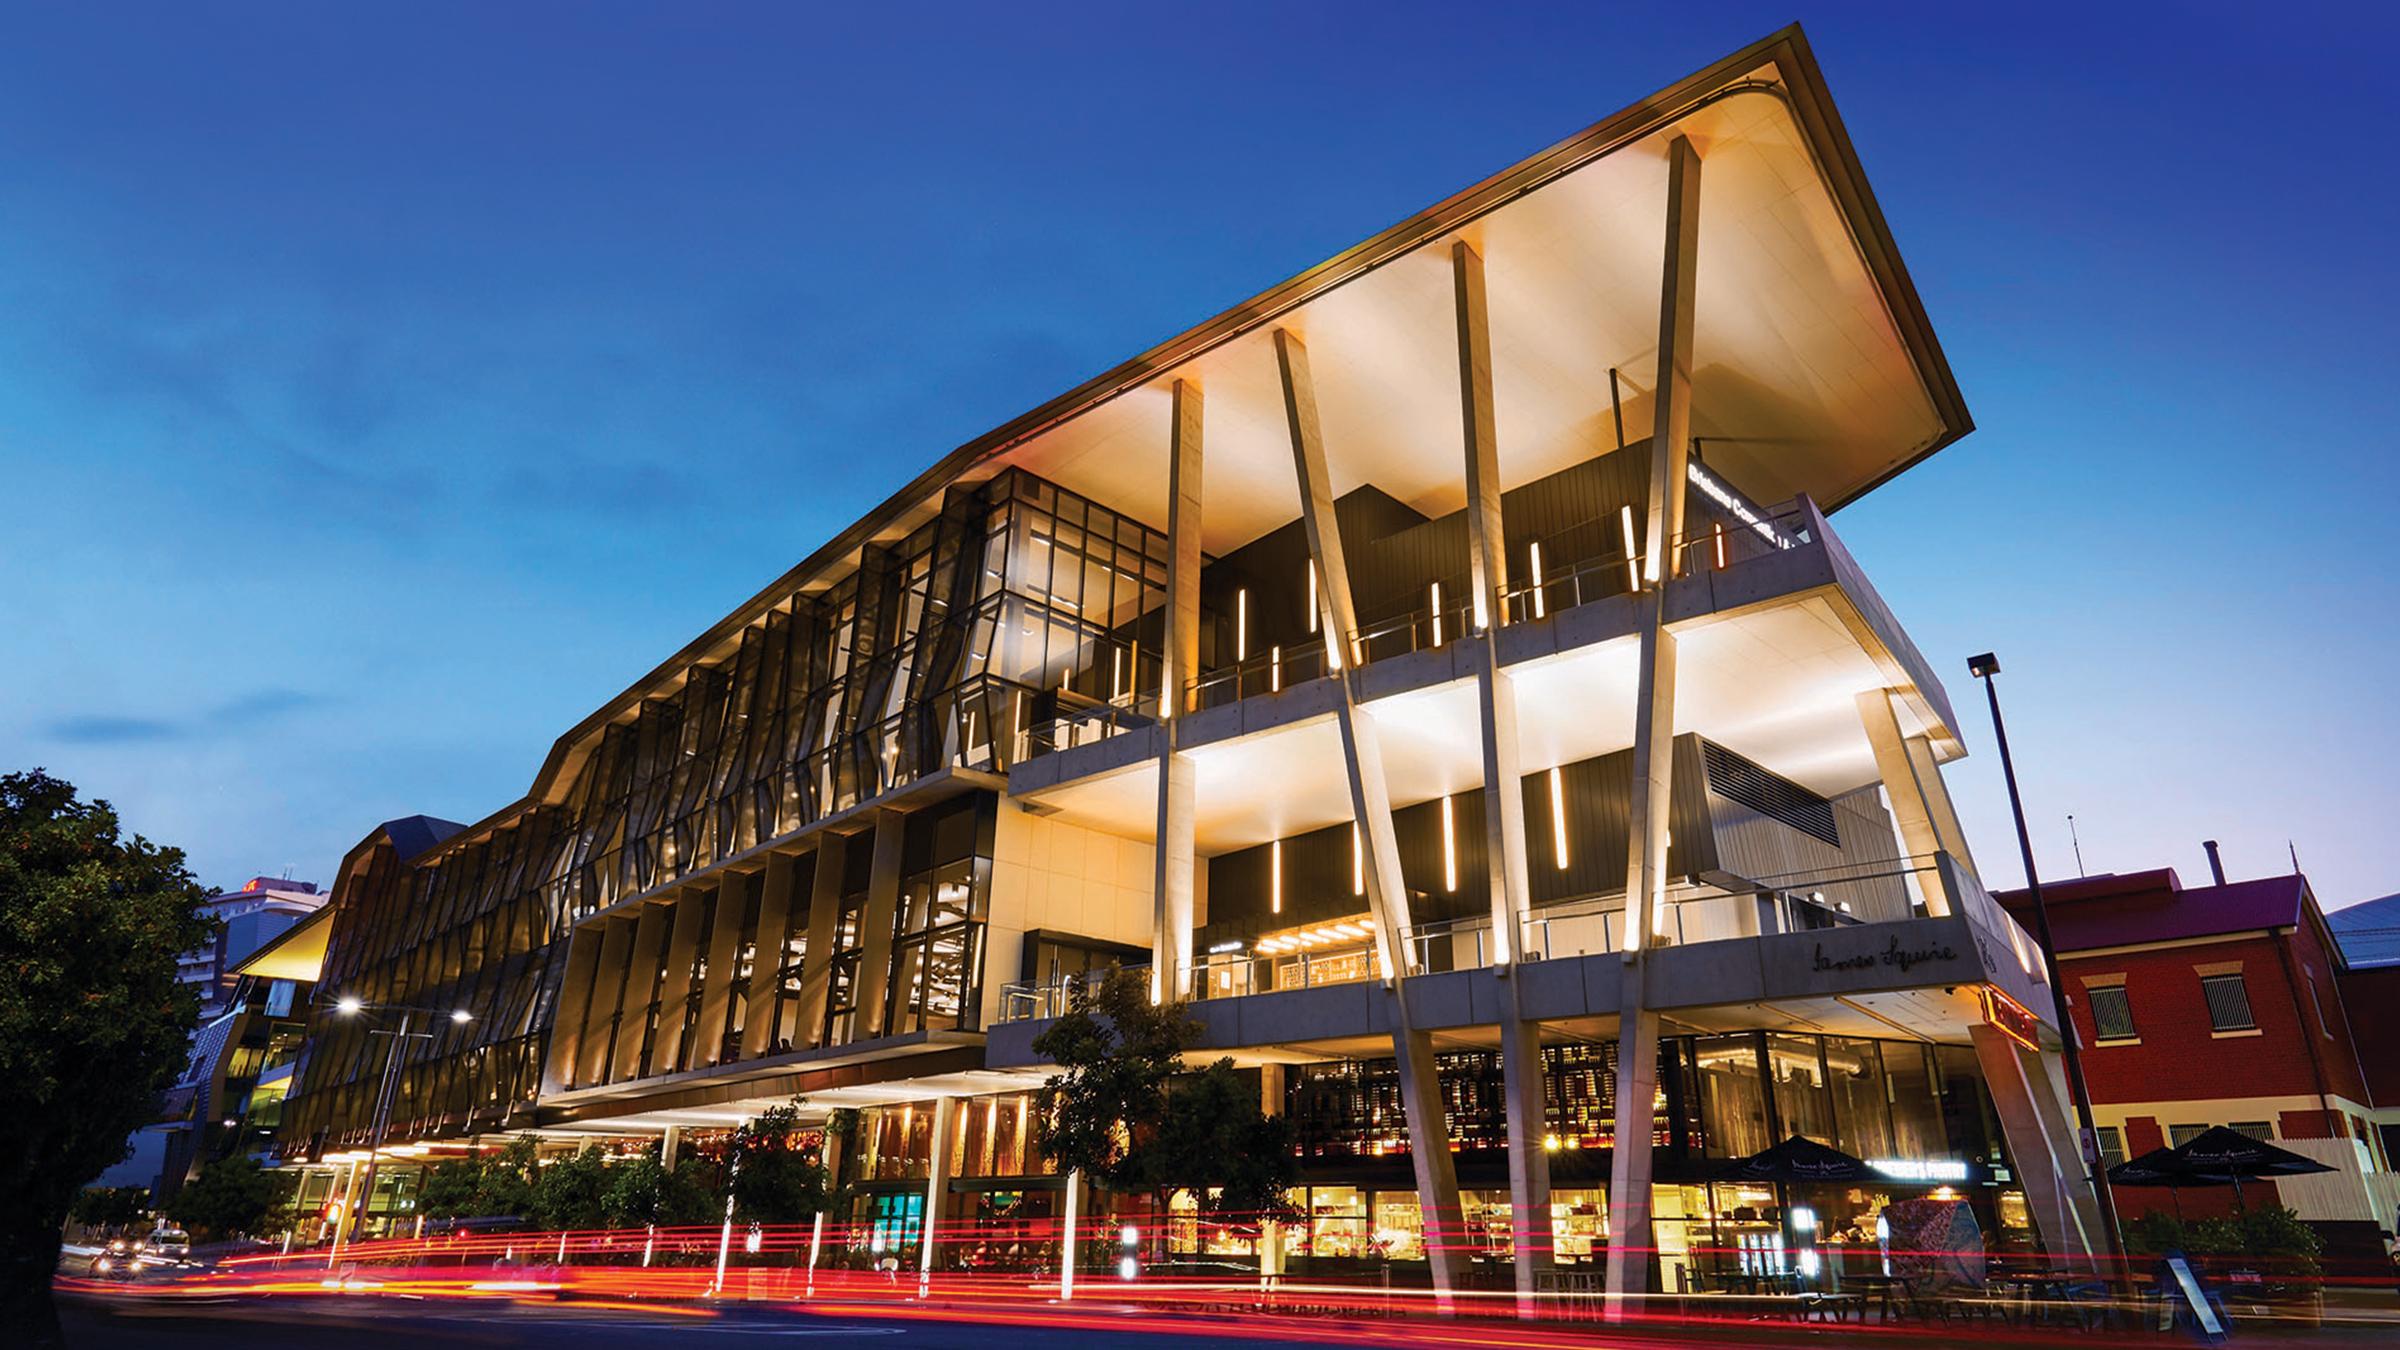 Street-facing facade of the Brisbane Convention and Exhibition Centre lit up at night